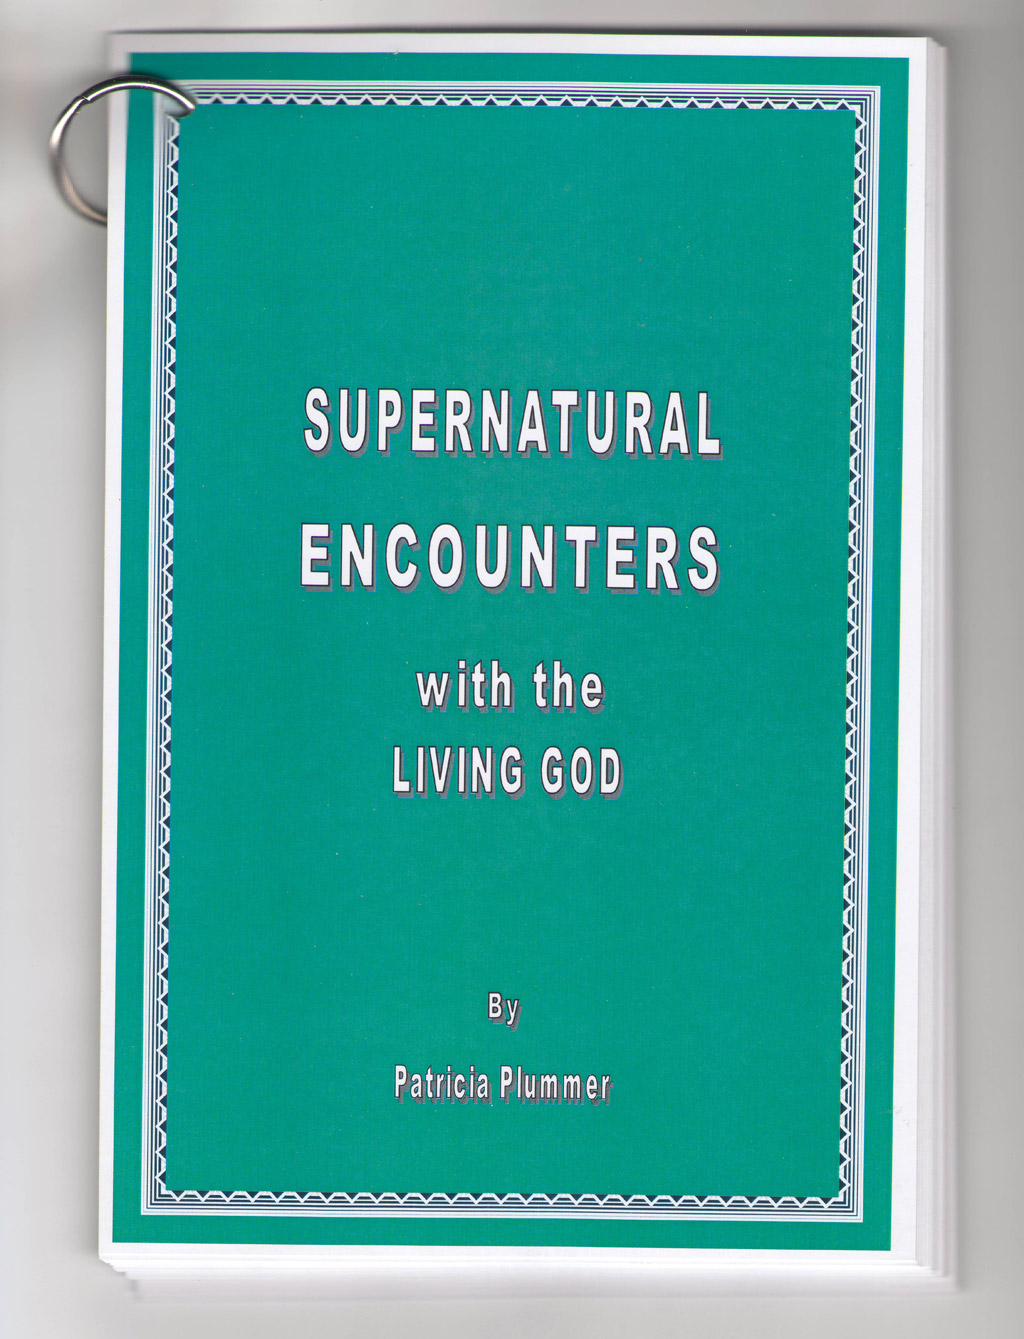 Supernatural Encounters with the Living God